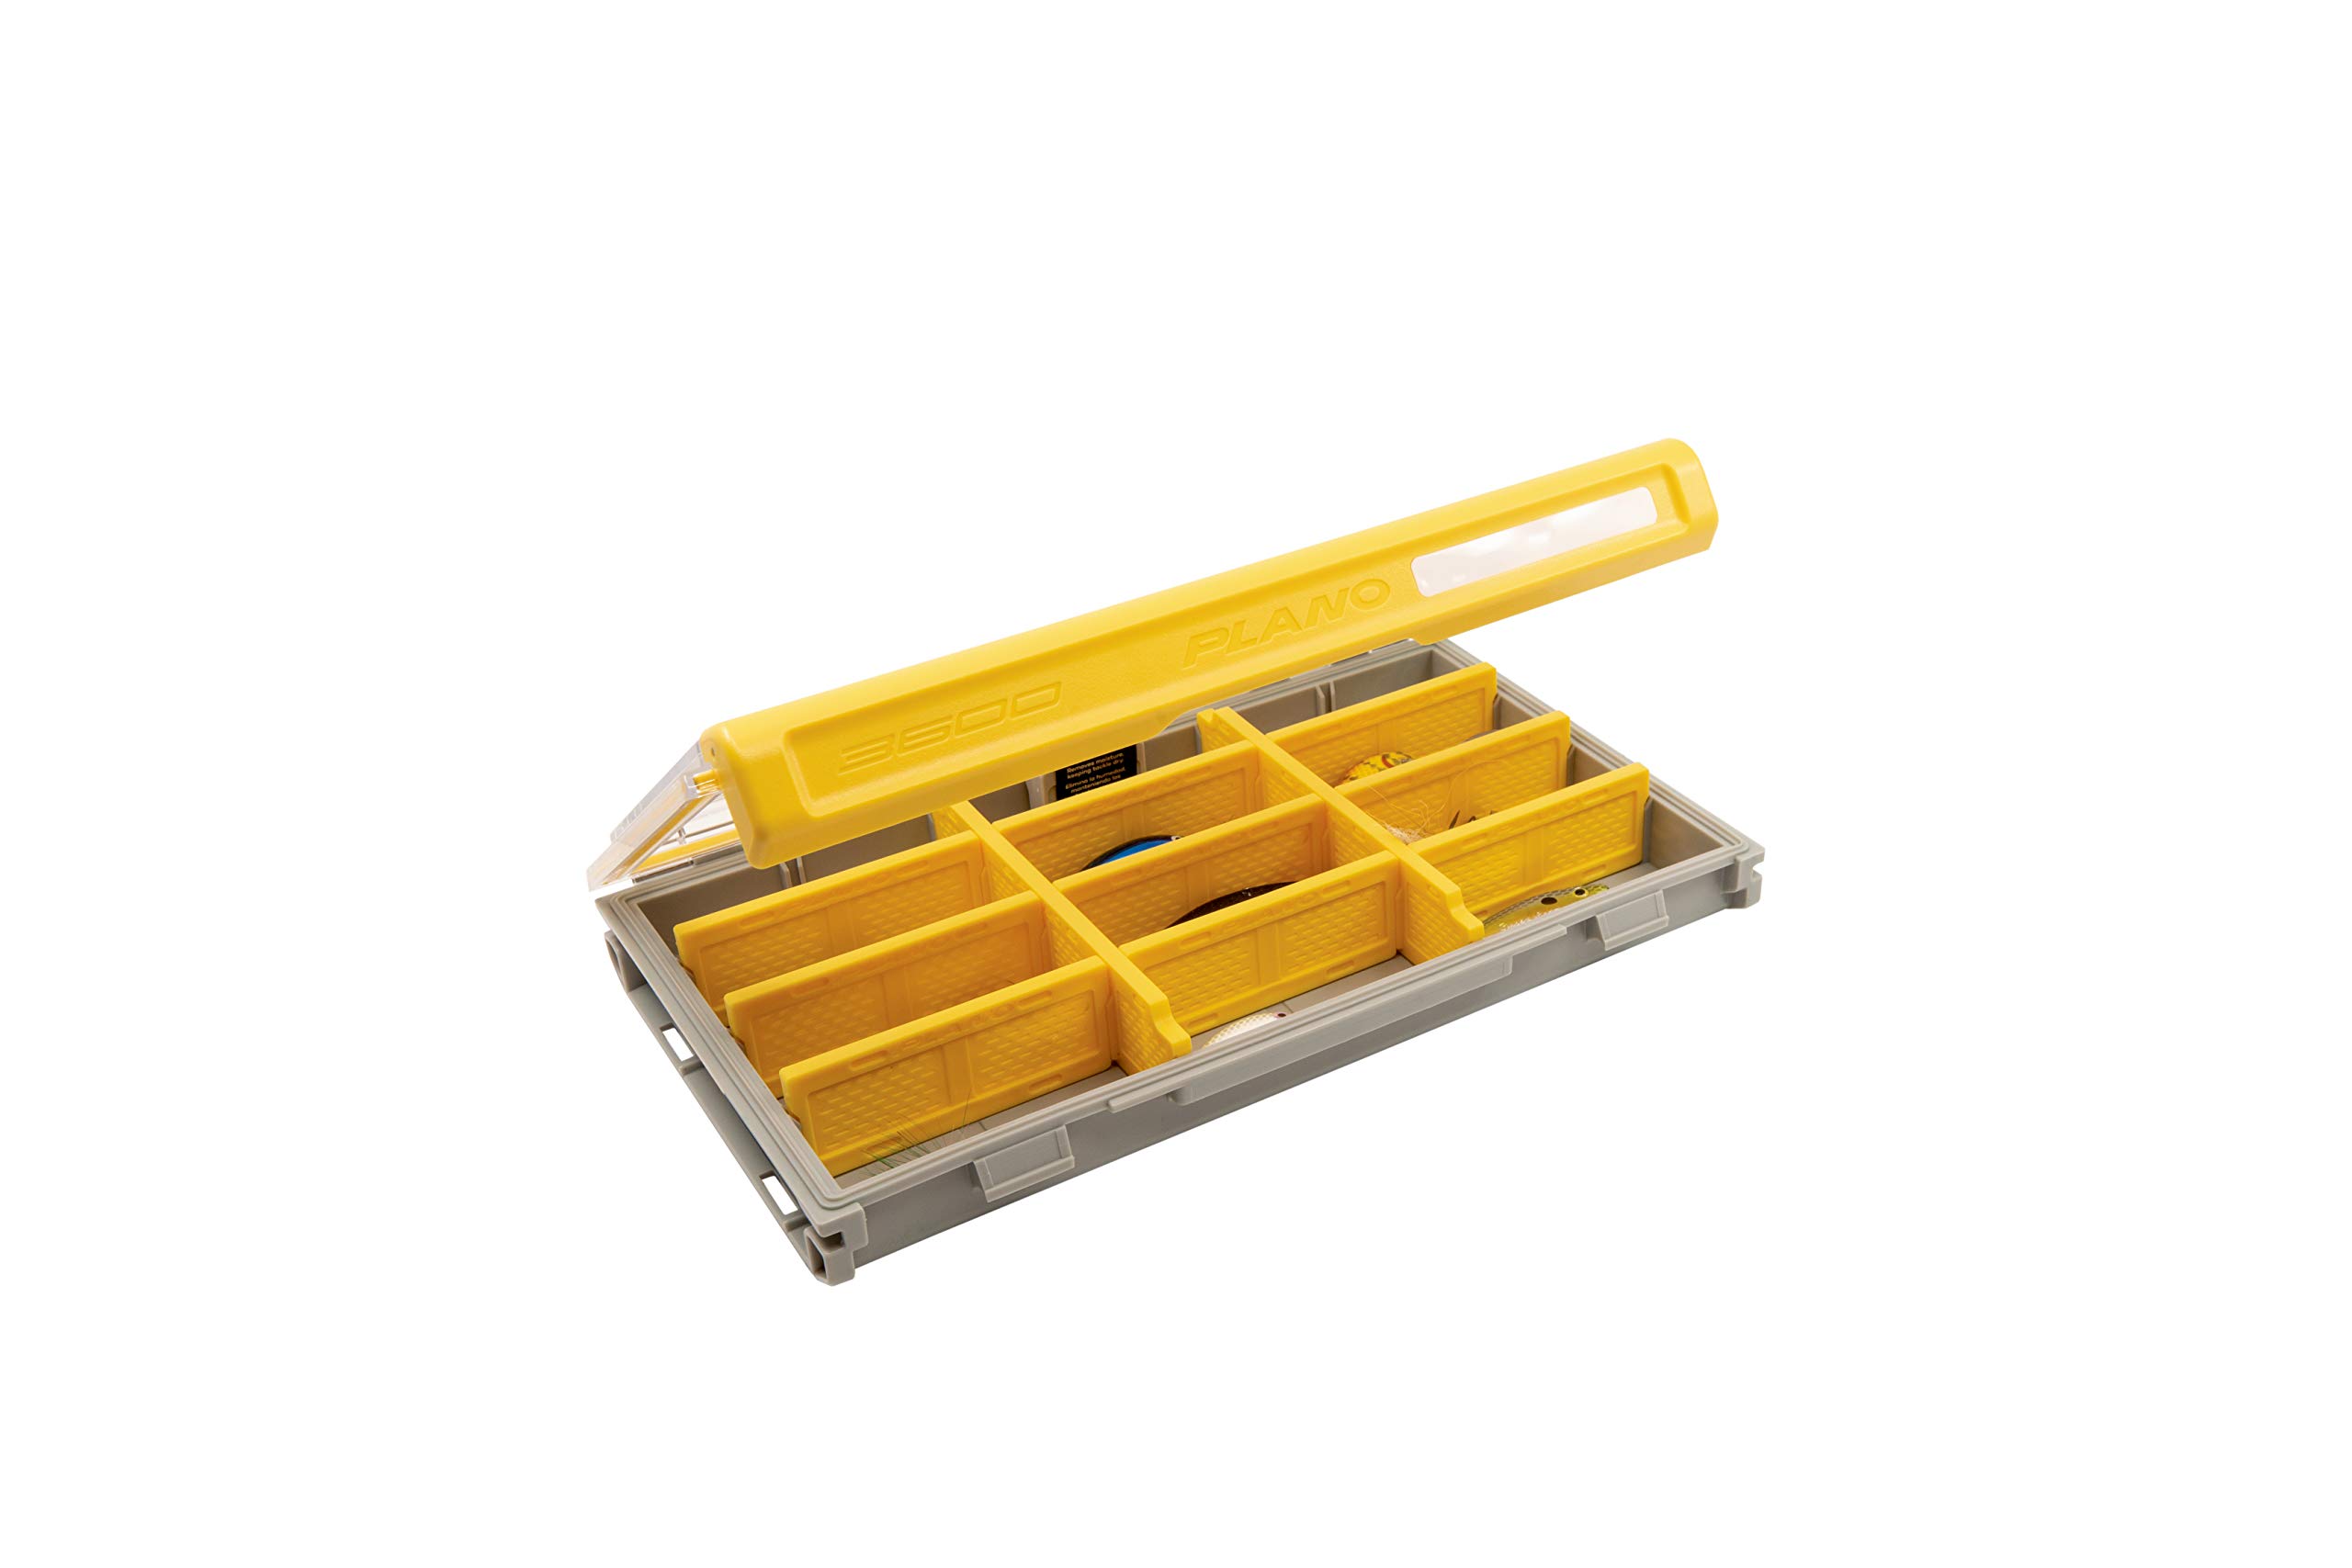 Plano Edge Flex 3600 Tackle Storage, Includes 38 Flex Dividers, Gray and  Yellow, Customizable Waterproof Tackle